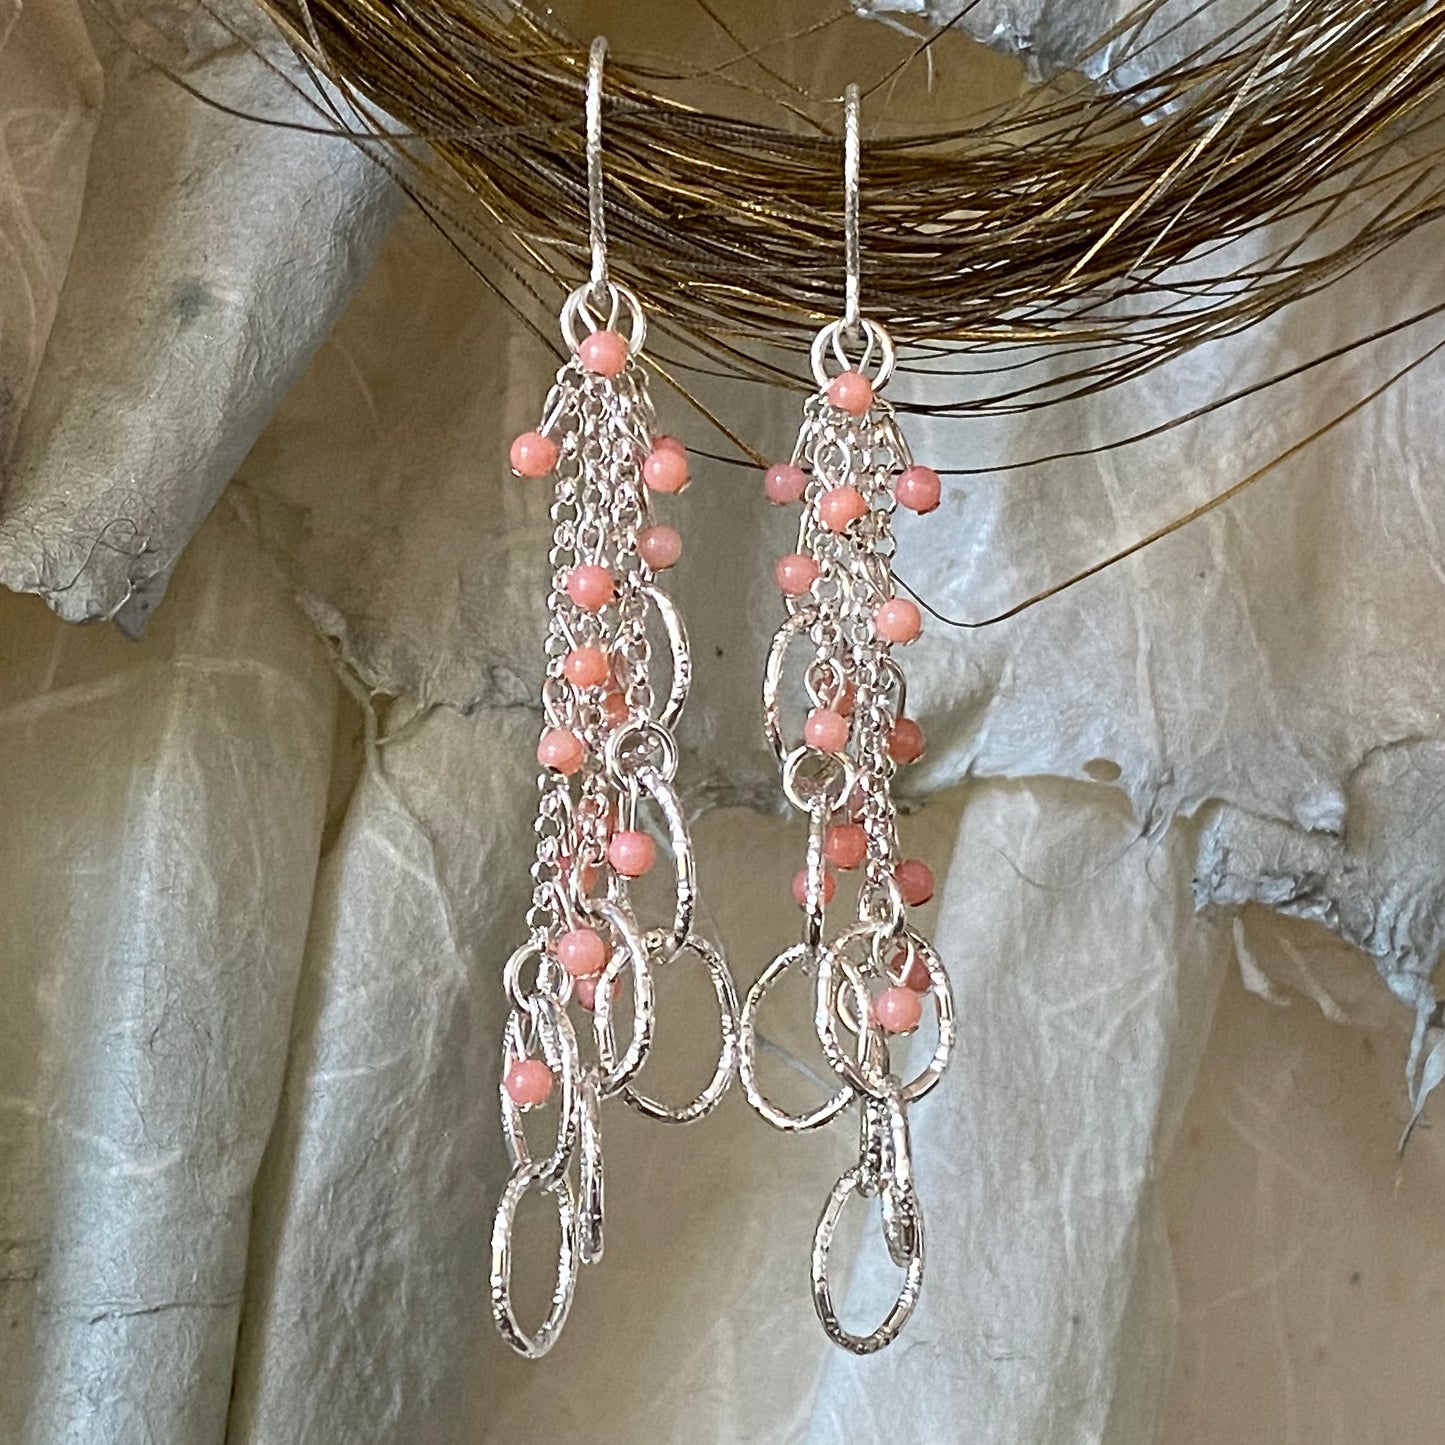 Angel Coral Dangle Earrings with Sterling Silver Patterned Ovals & Sparkle Earring Wires